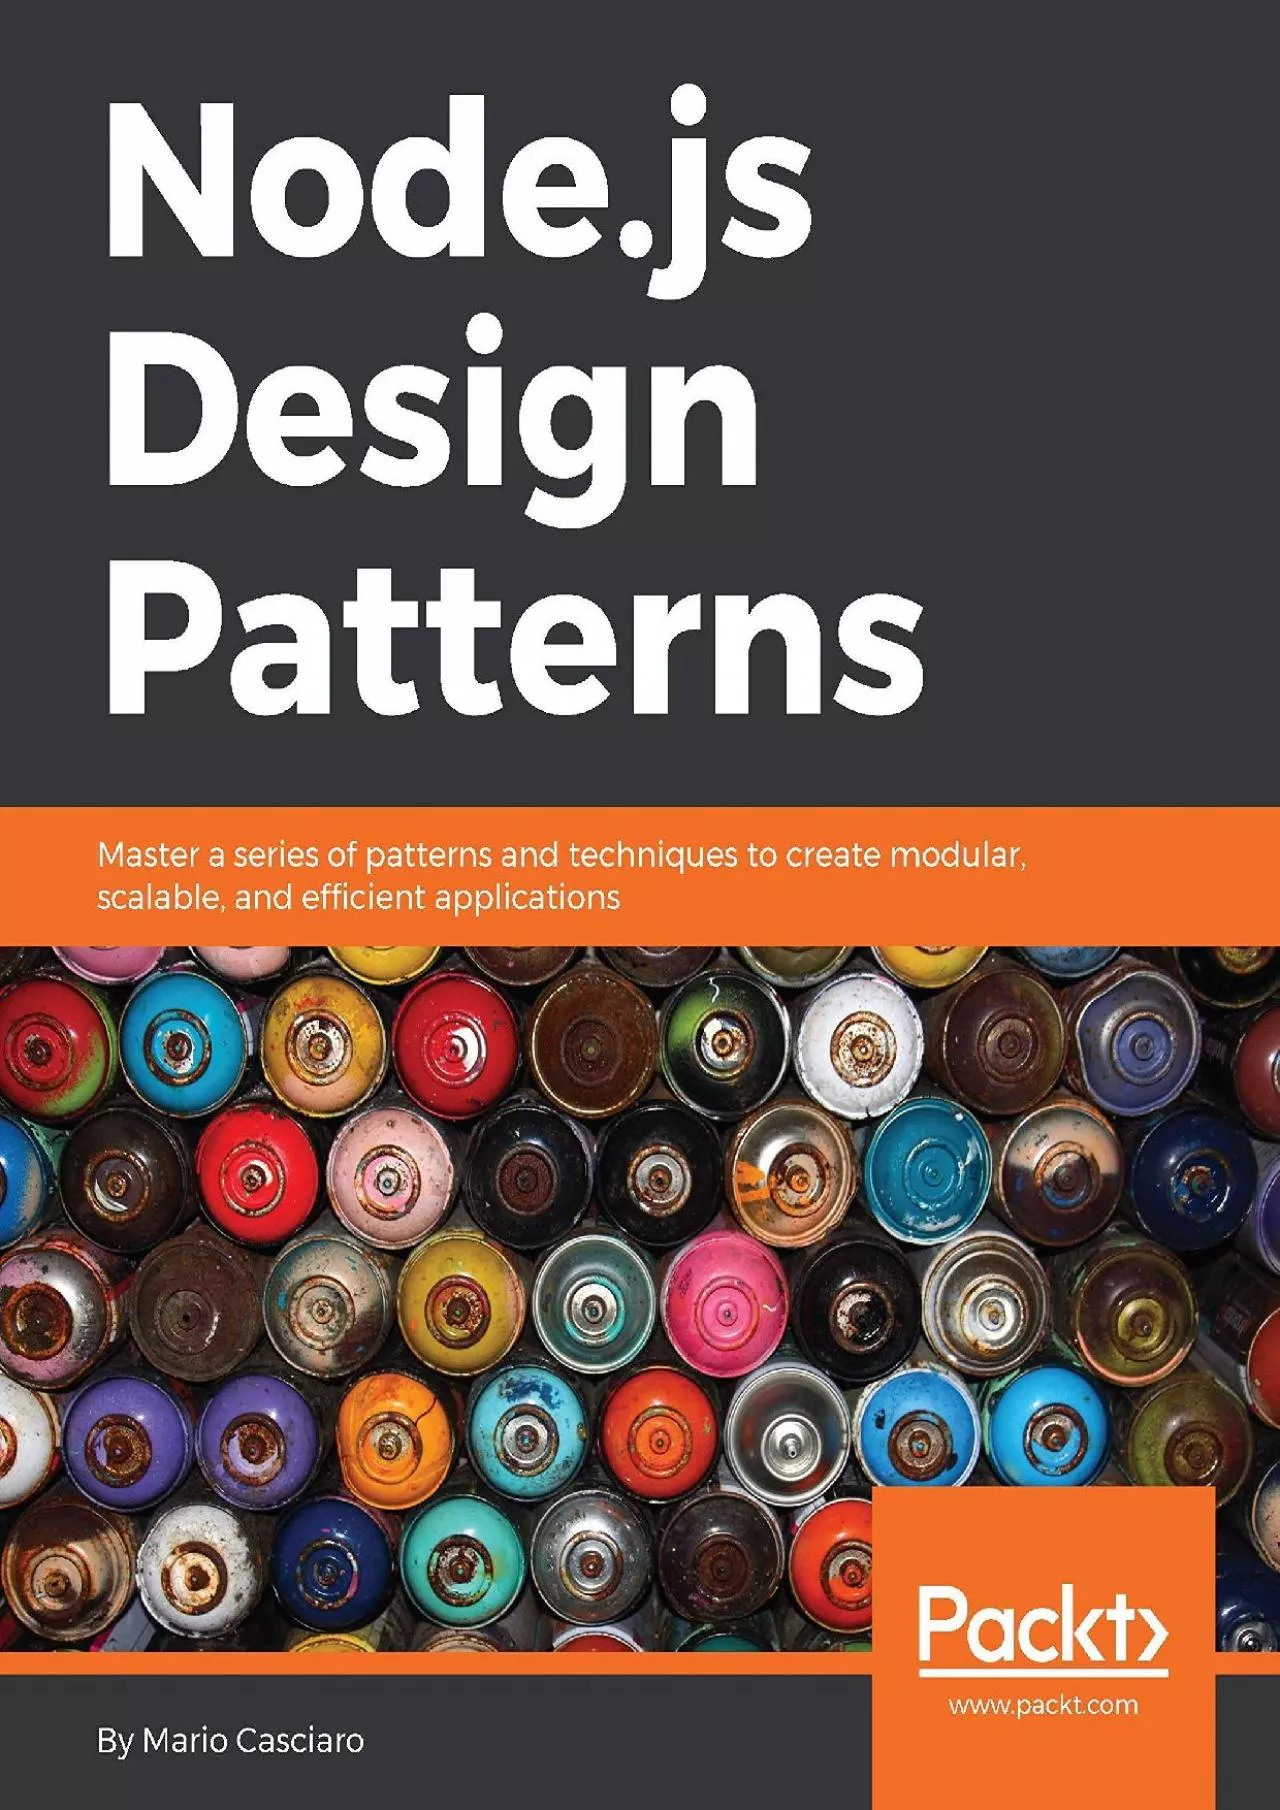 (EBOOK)-Node.js Design Patterns: Master a series of patterns and techniques to create